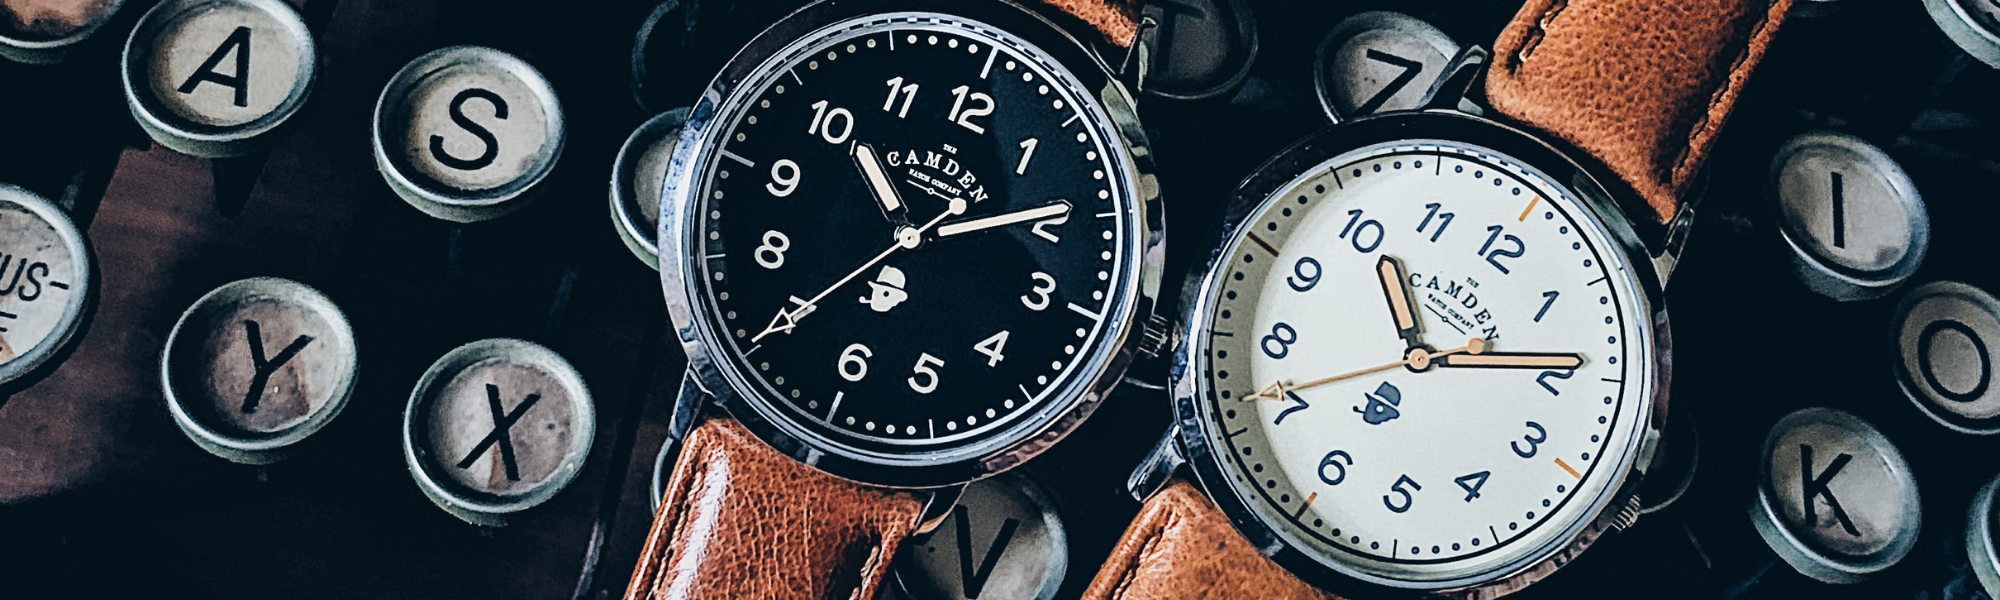 Camden Chap - Special Edition Watches by The Camden Watch Company